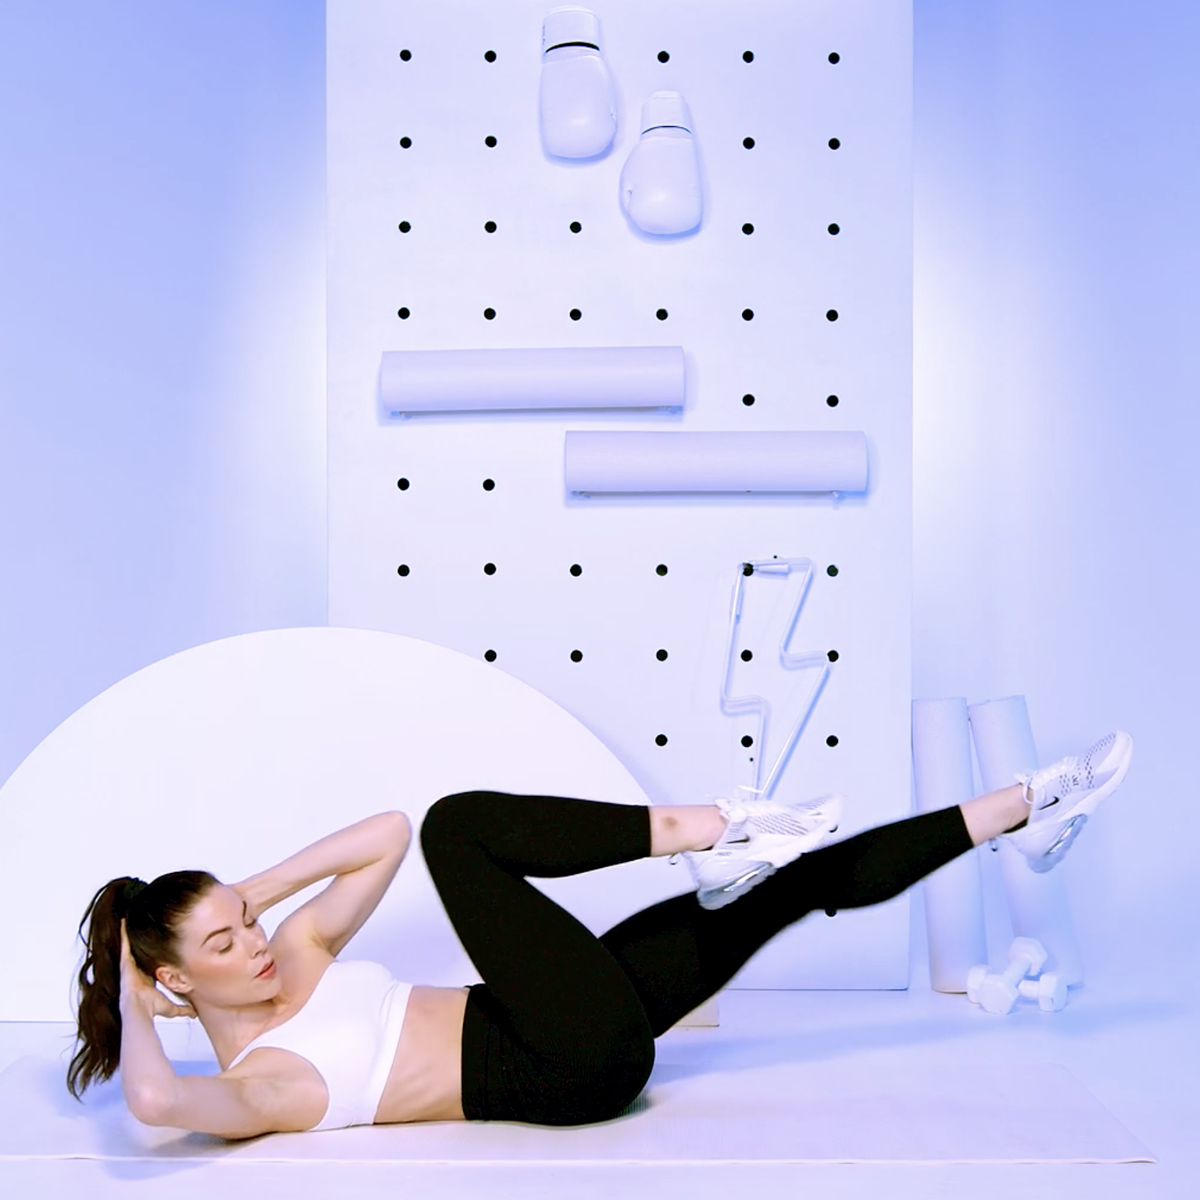 Ab Workout: 6 Better Core Exercises for Beginners